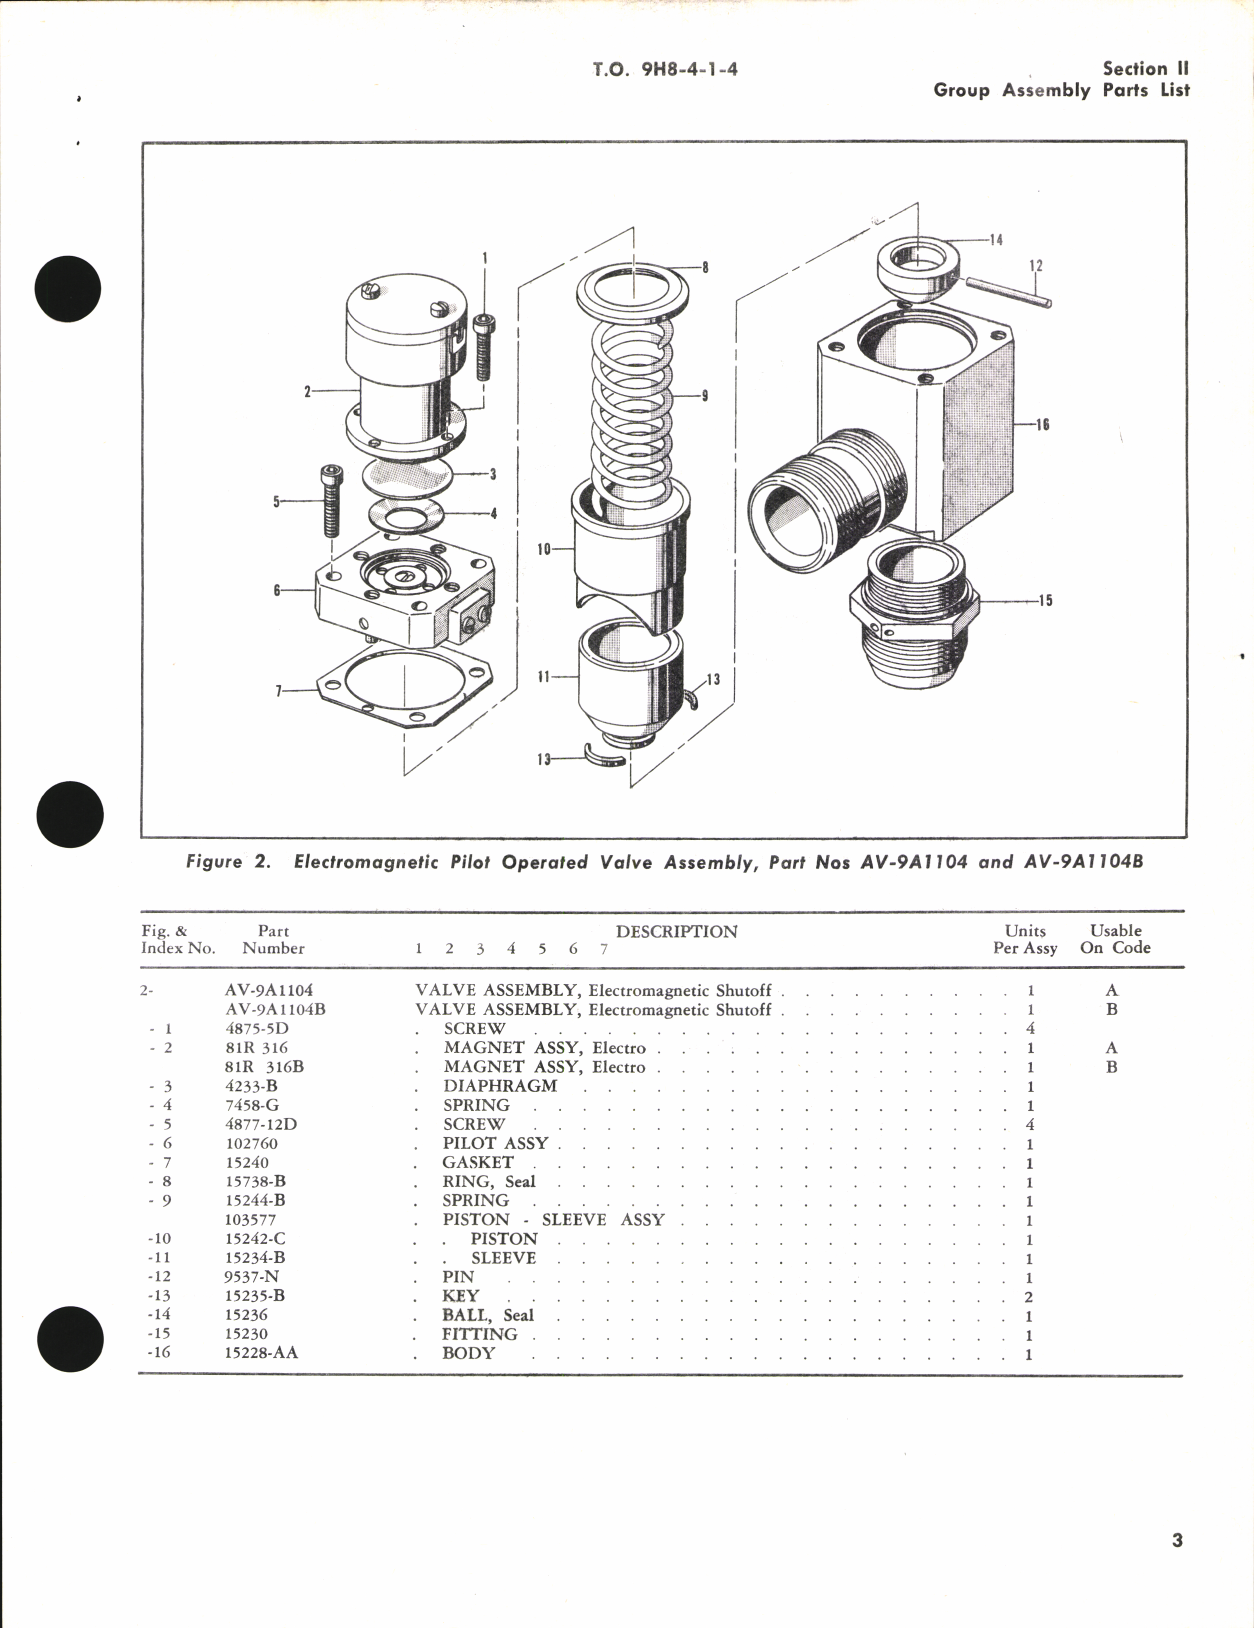 Sample page 5 from AirCorps Library document: Illustrated Parts breakdown for Electromagnetic Pilot Operated Valve AV-9 Series, Part No. AV-9A1105 and Similar Valves